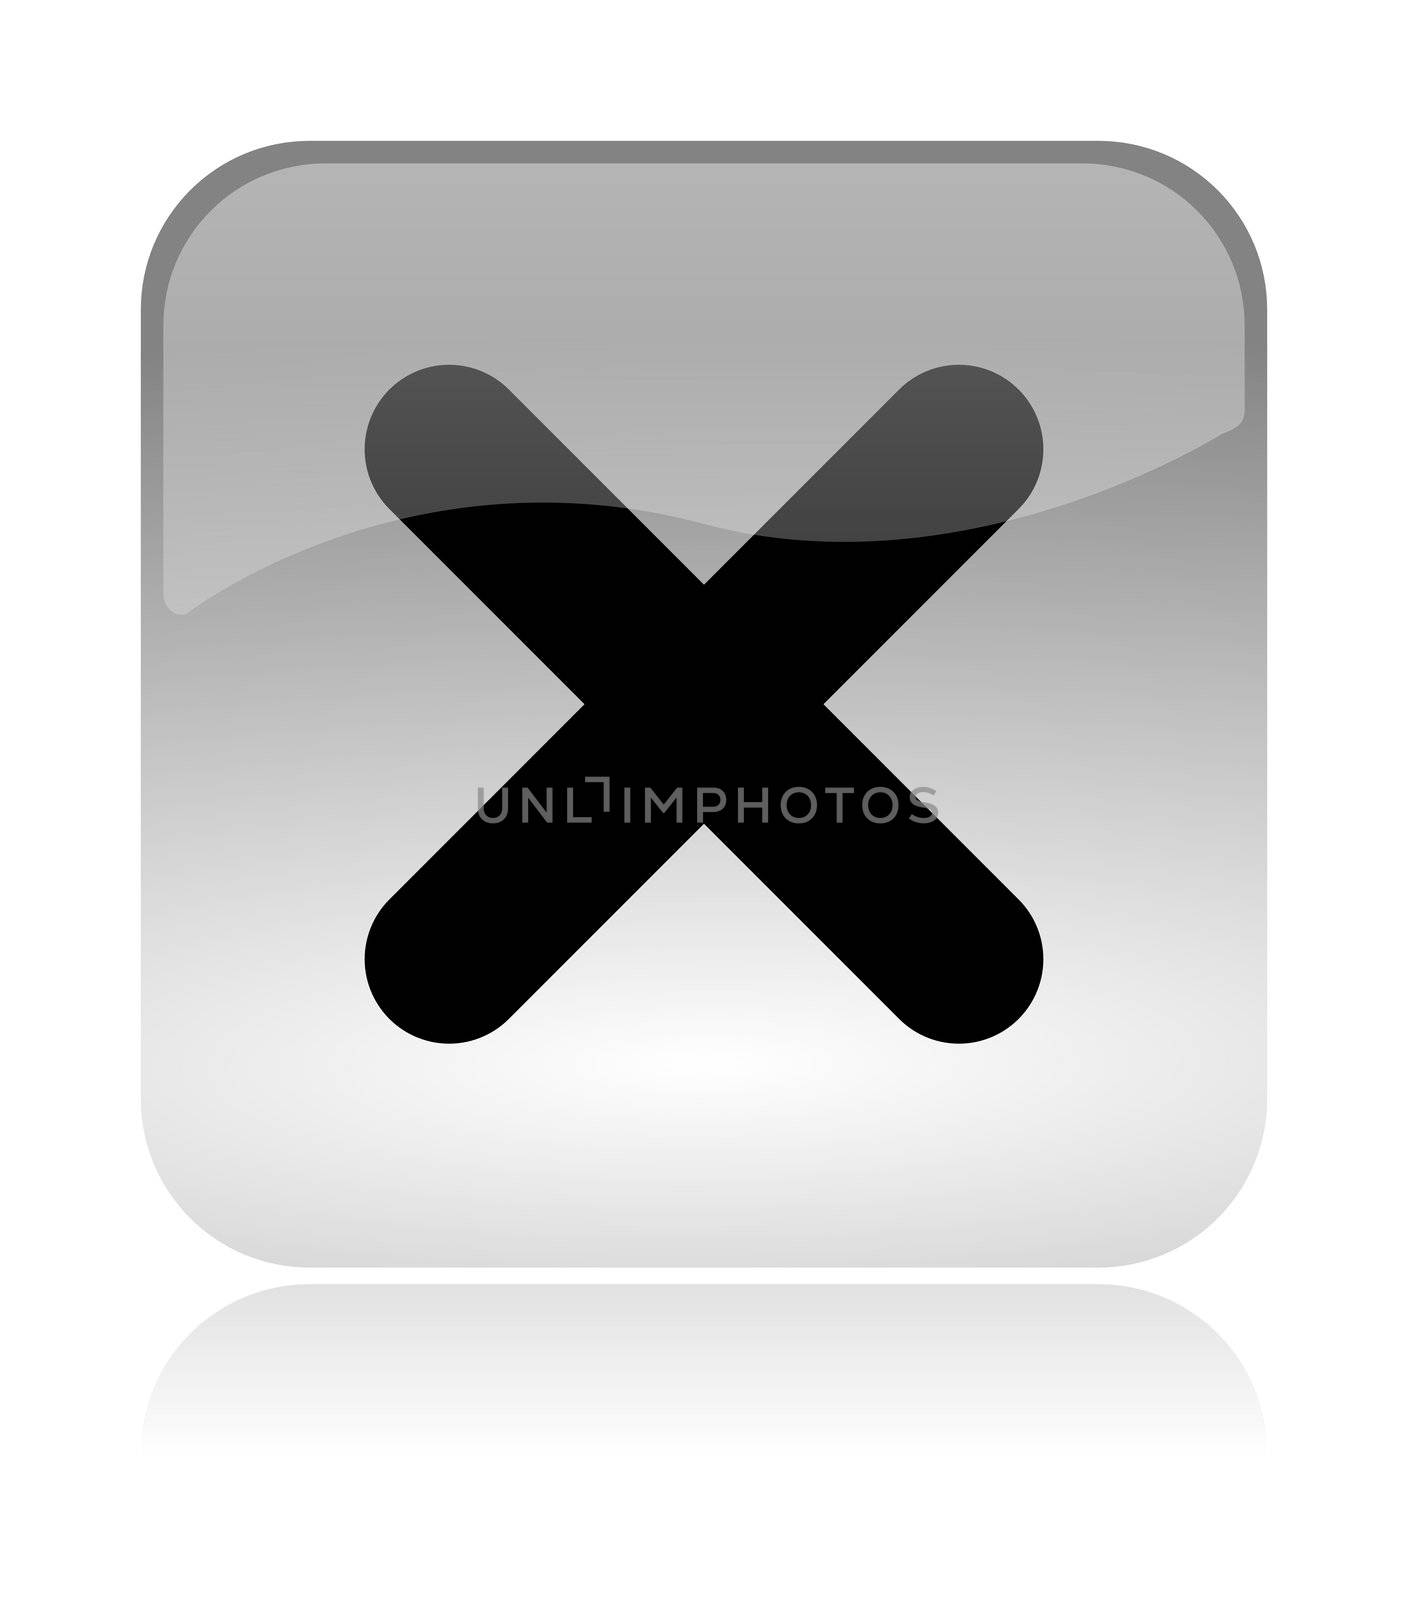 Cross, uncheck, white, transparent and glossy web interface icon with reflection